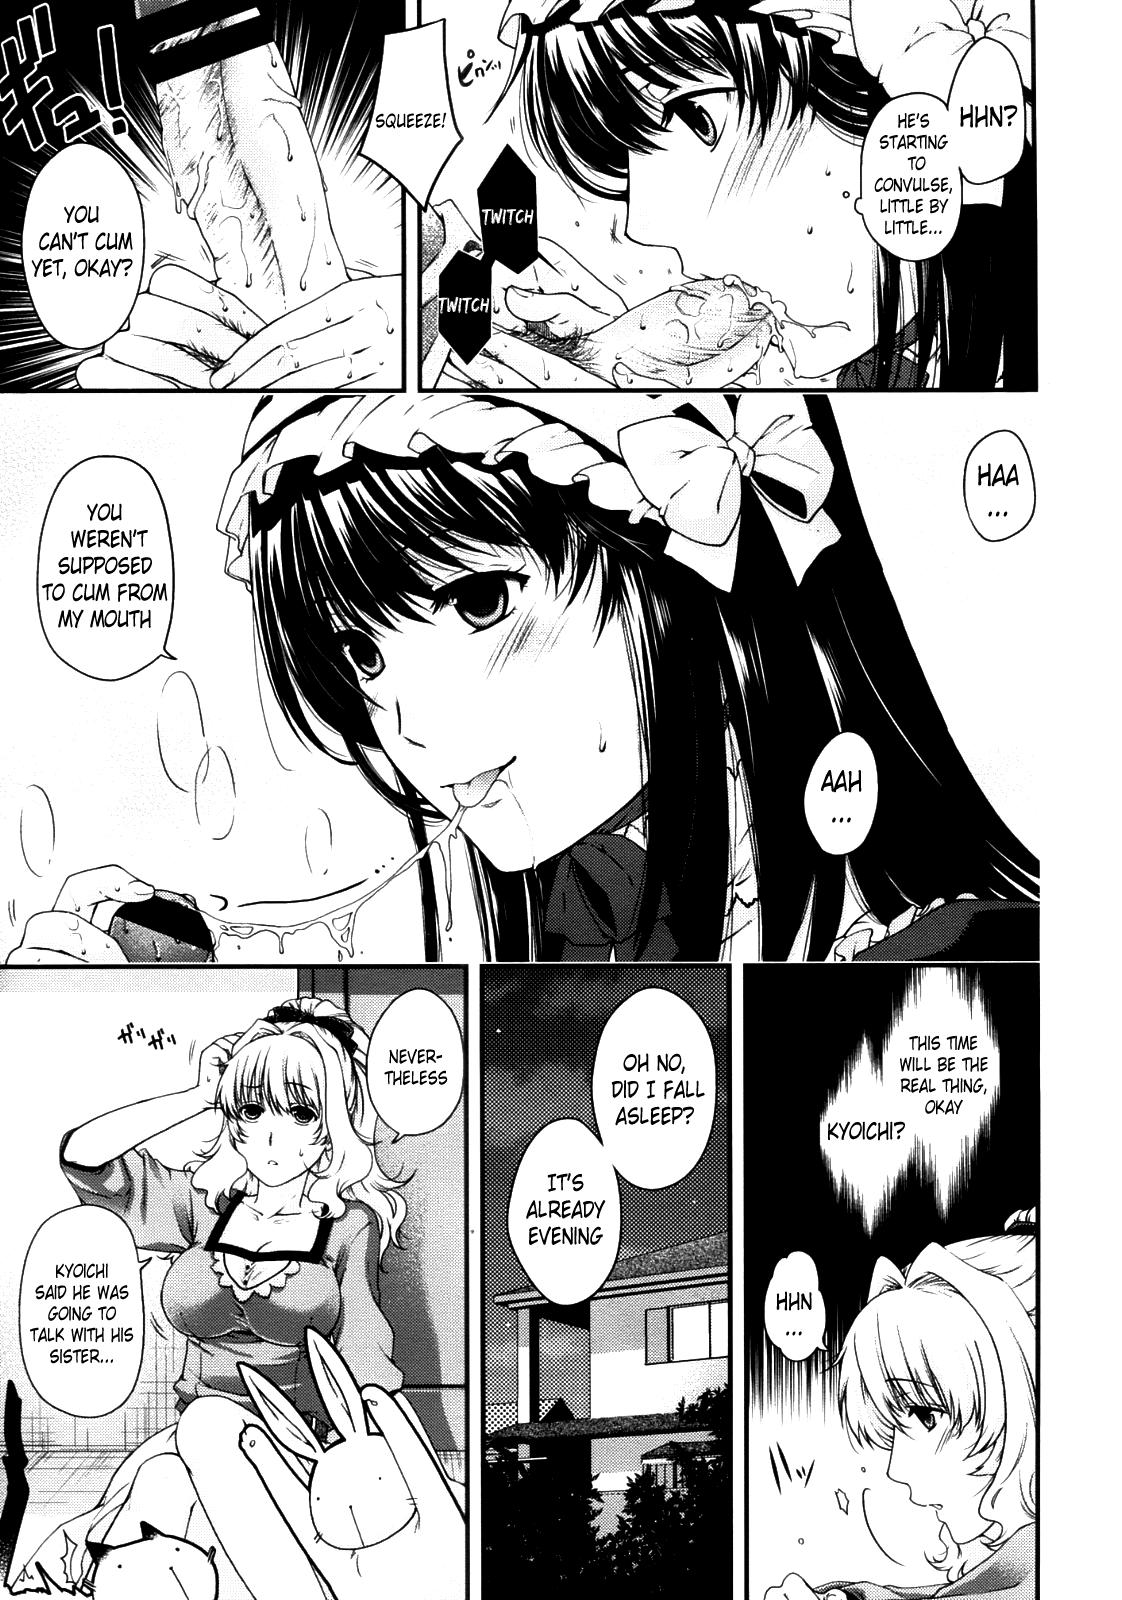 Pee Kare to Imouto no Houteishiki | The Equation of Him and His Little Sister Ghetto - Page 11